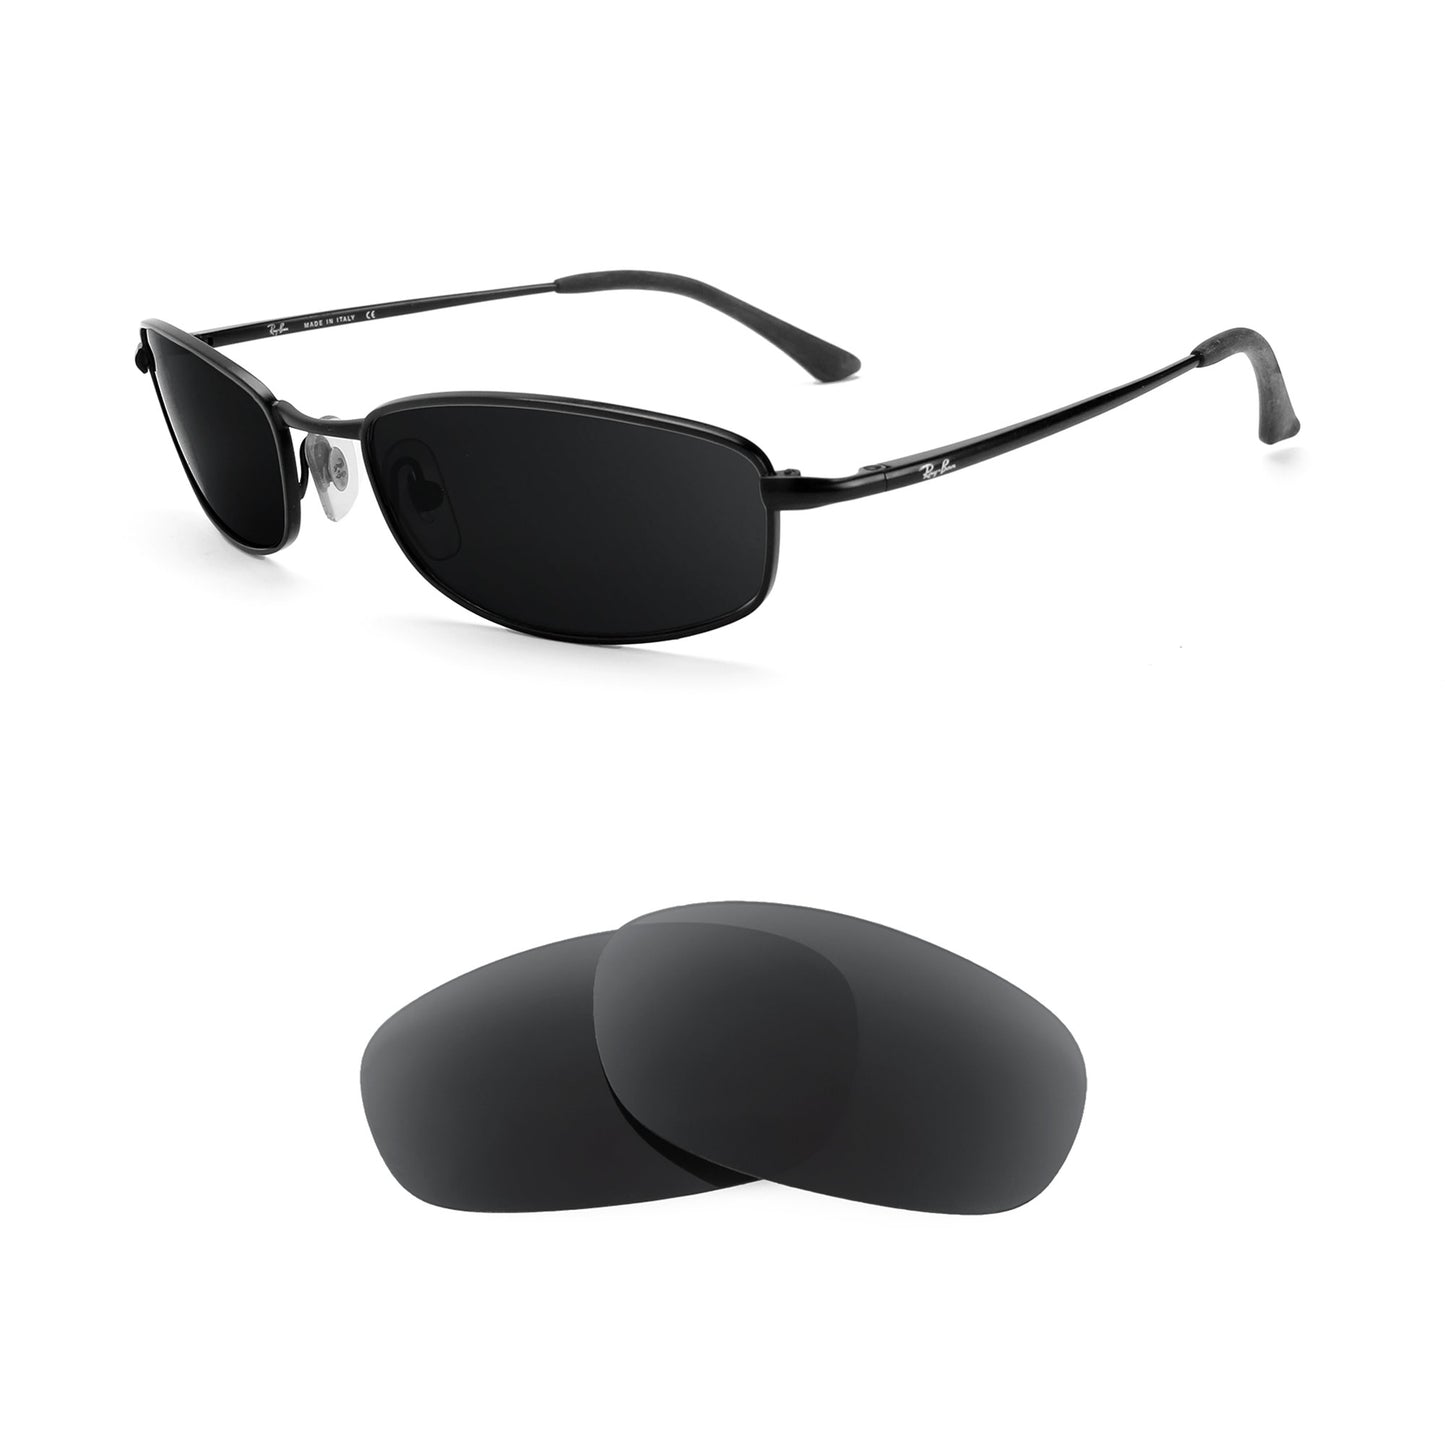 Ray-Ban New Sleek RB3198 55mm sunglasses with replacement lenses